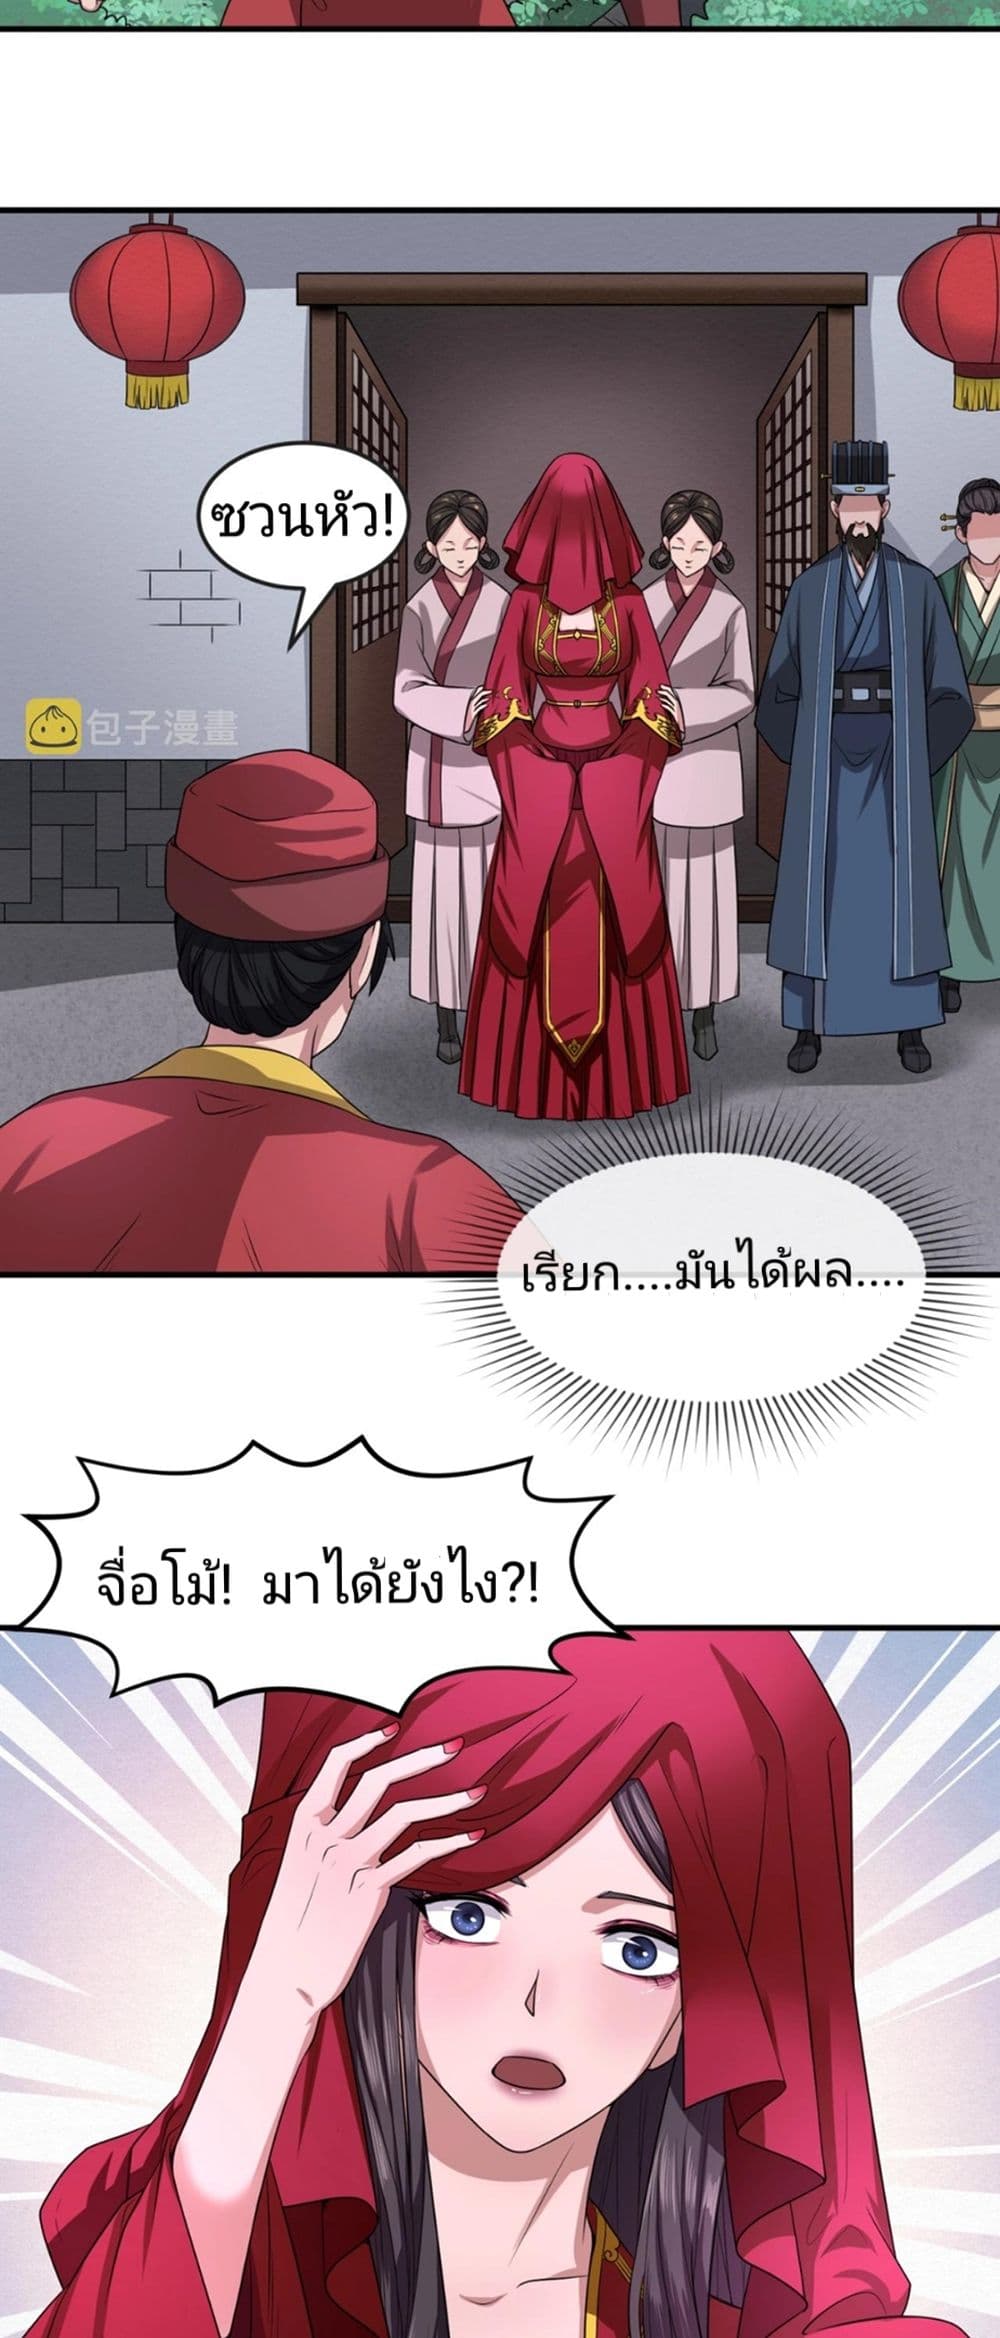 The Age of Ghost Spirits à¸à¸­à¸à¸à¸µà¹ 15 (7)